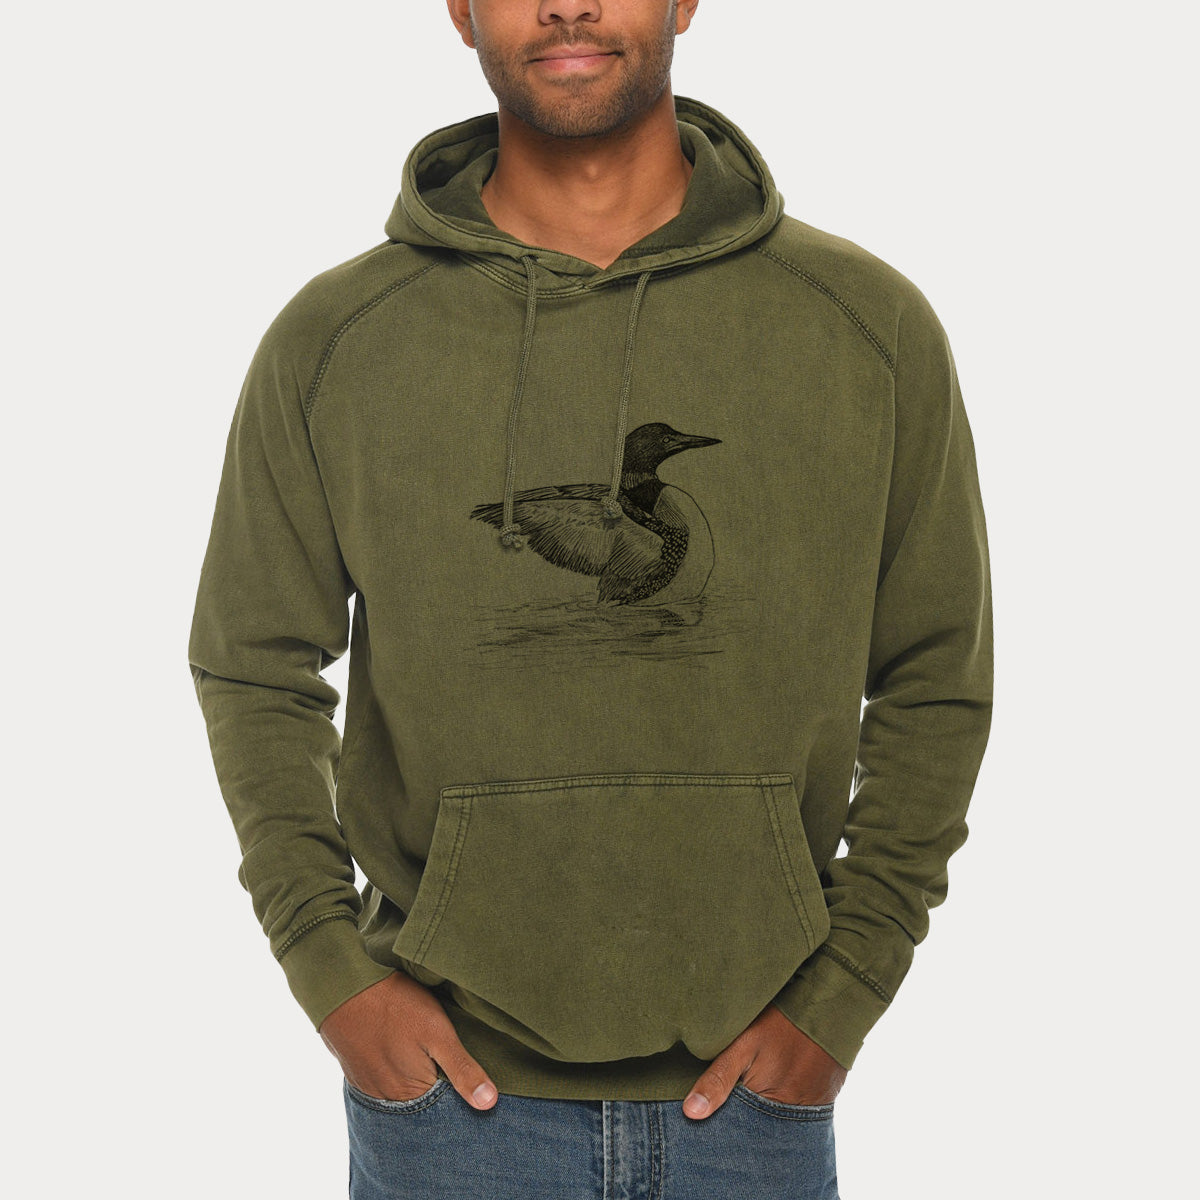 Common Loon - Gavia immer  - Mid-Weight Unisex Vintage 100% Cotton Hoodie